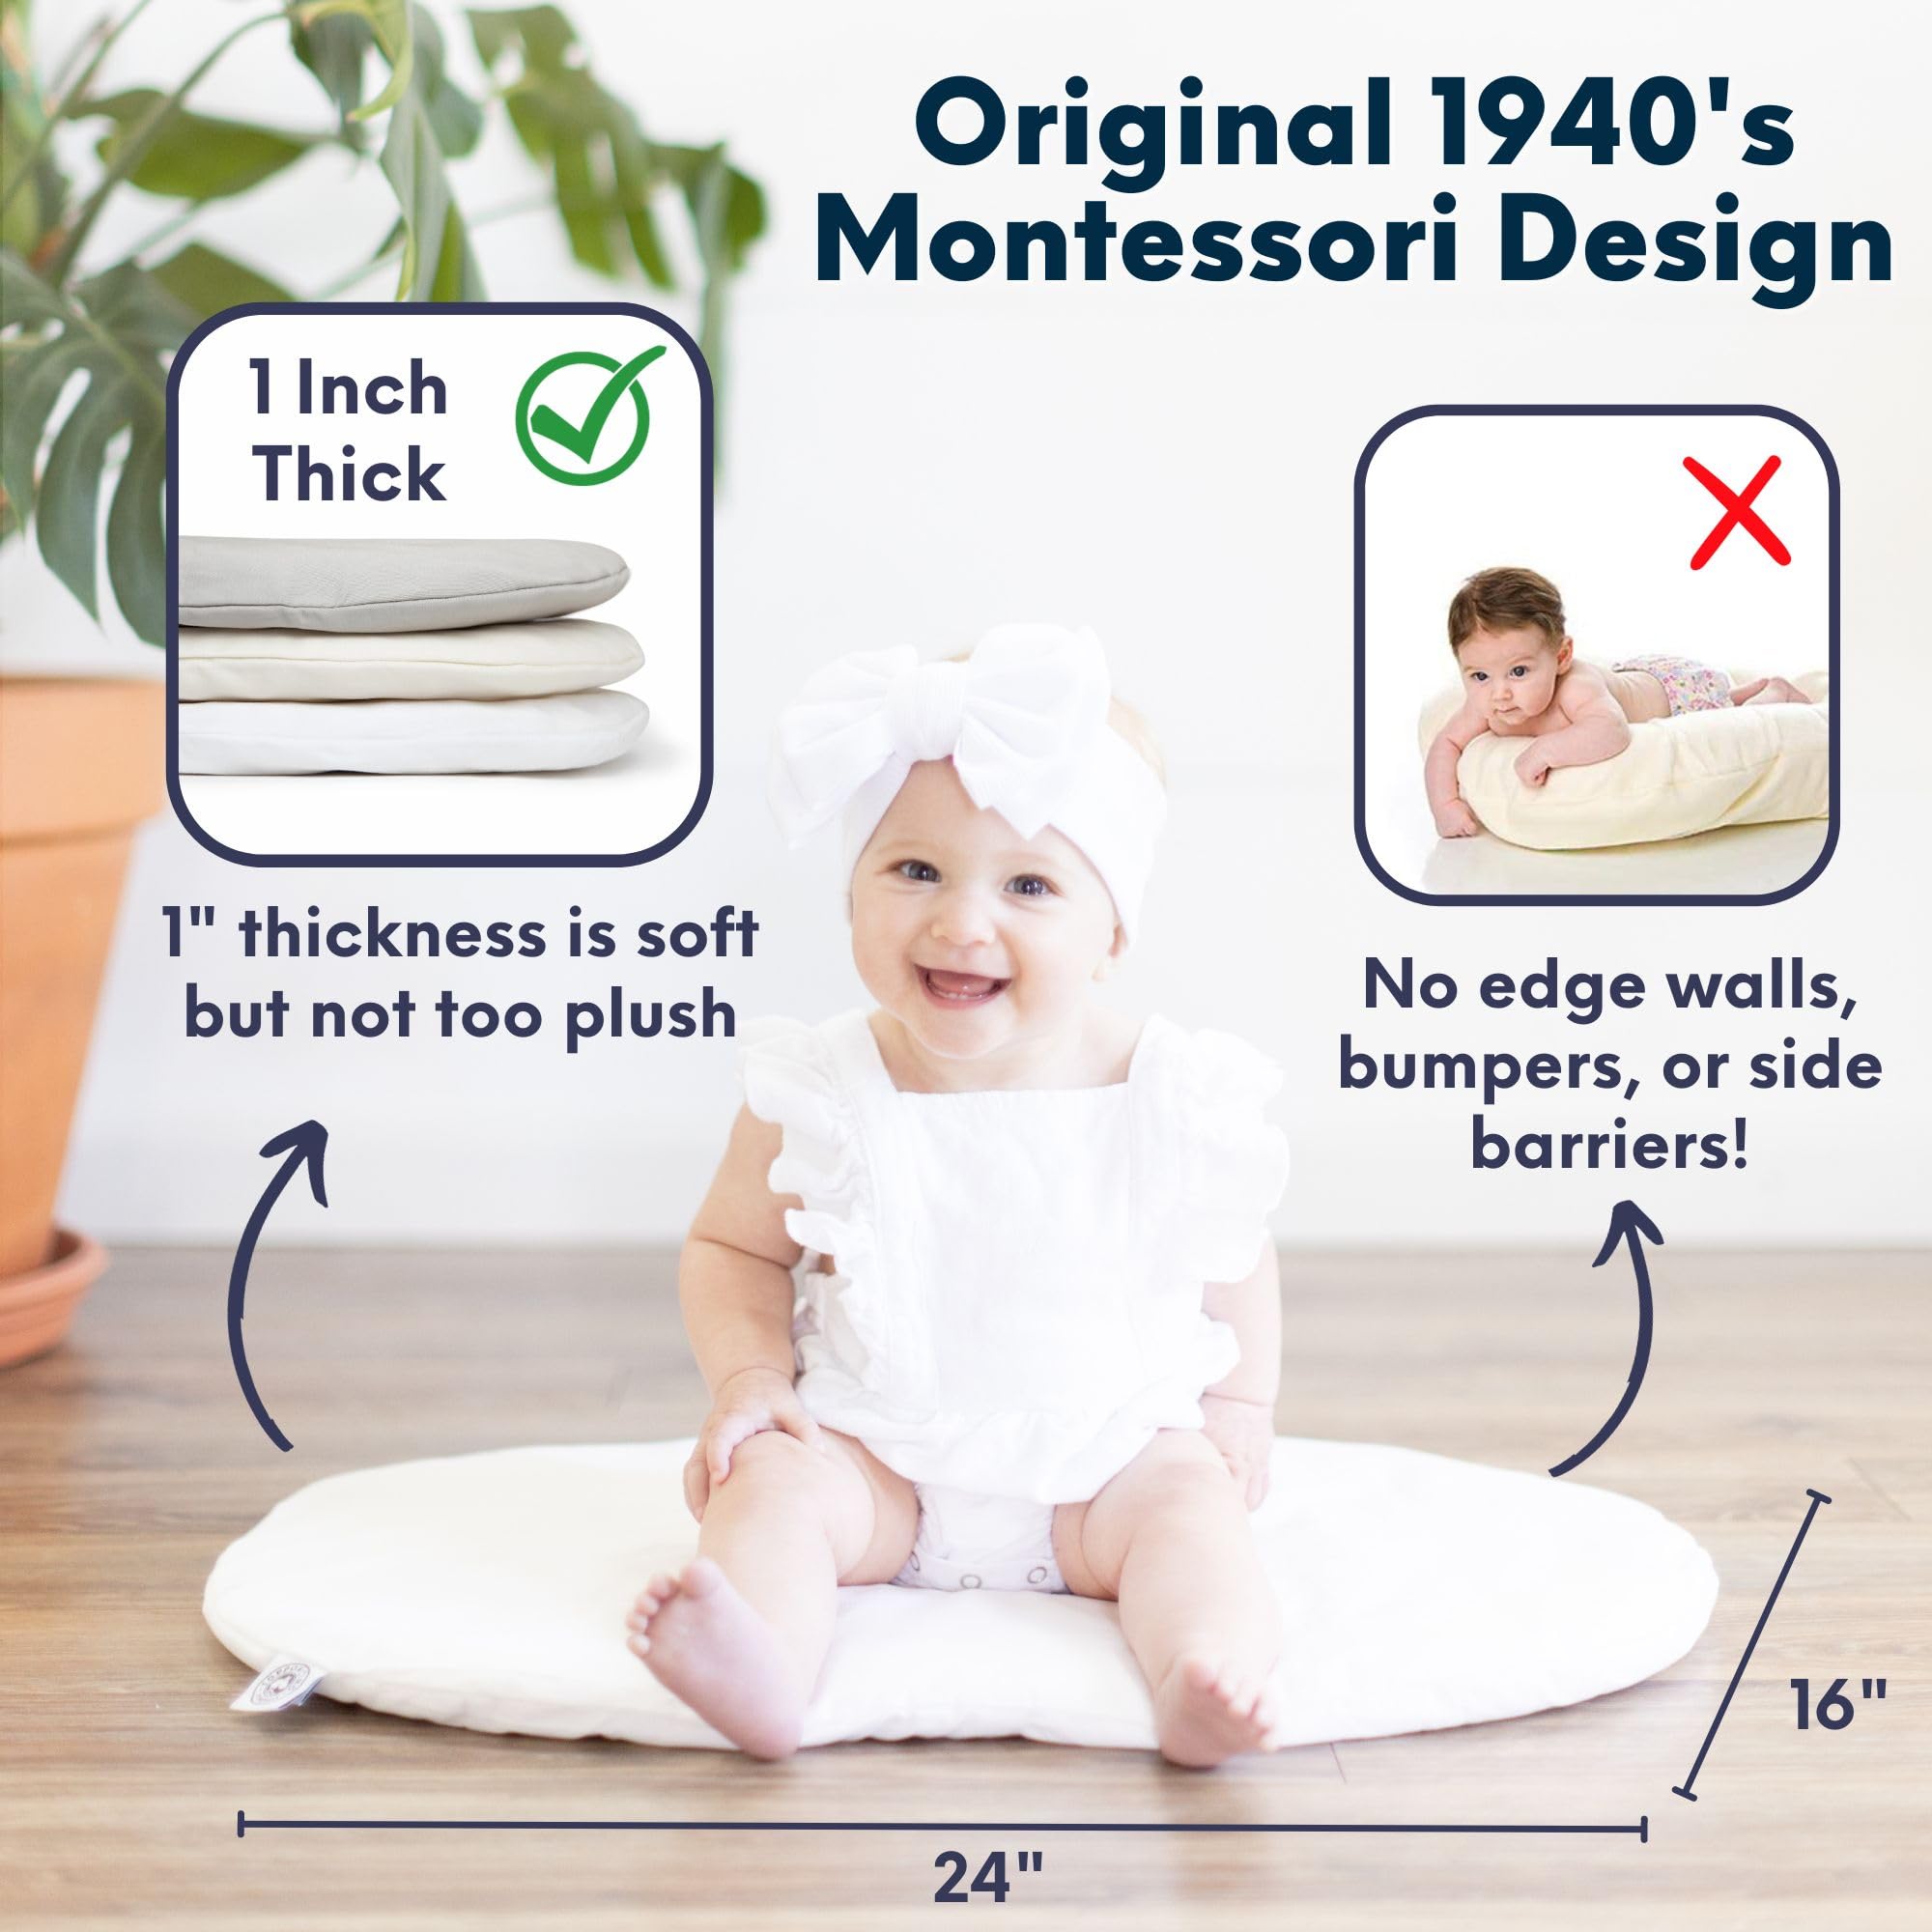 Topponcino Bundle (Pure White) | Original Topponcino, Extra Cover, and Pee Pads